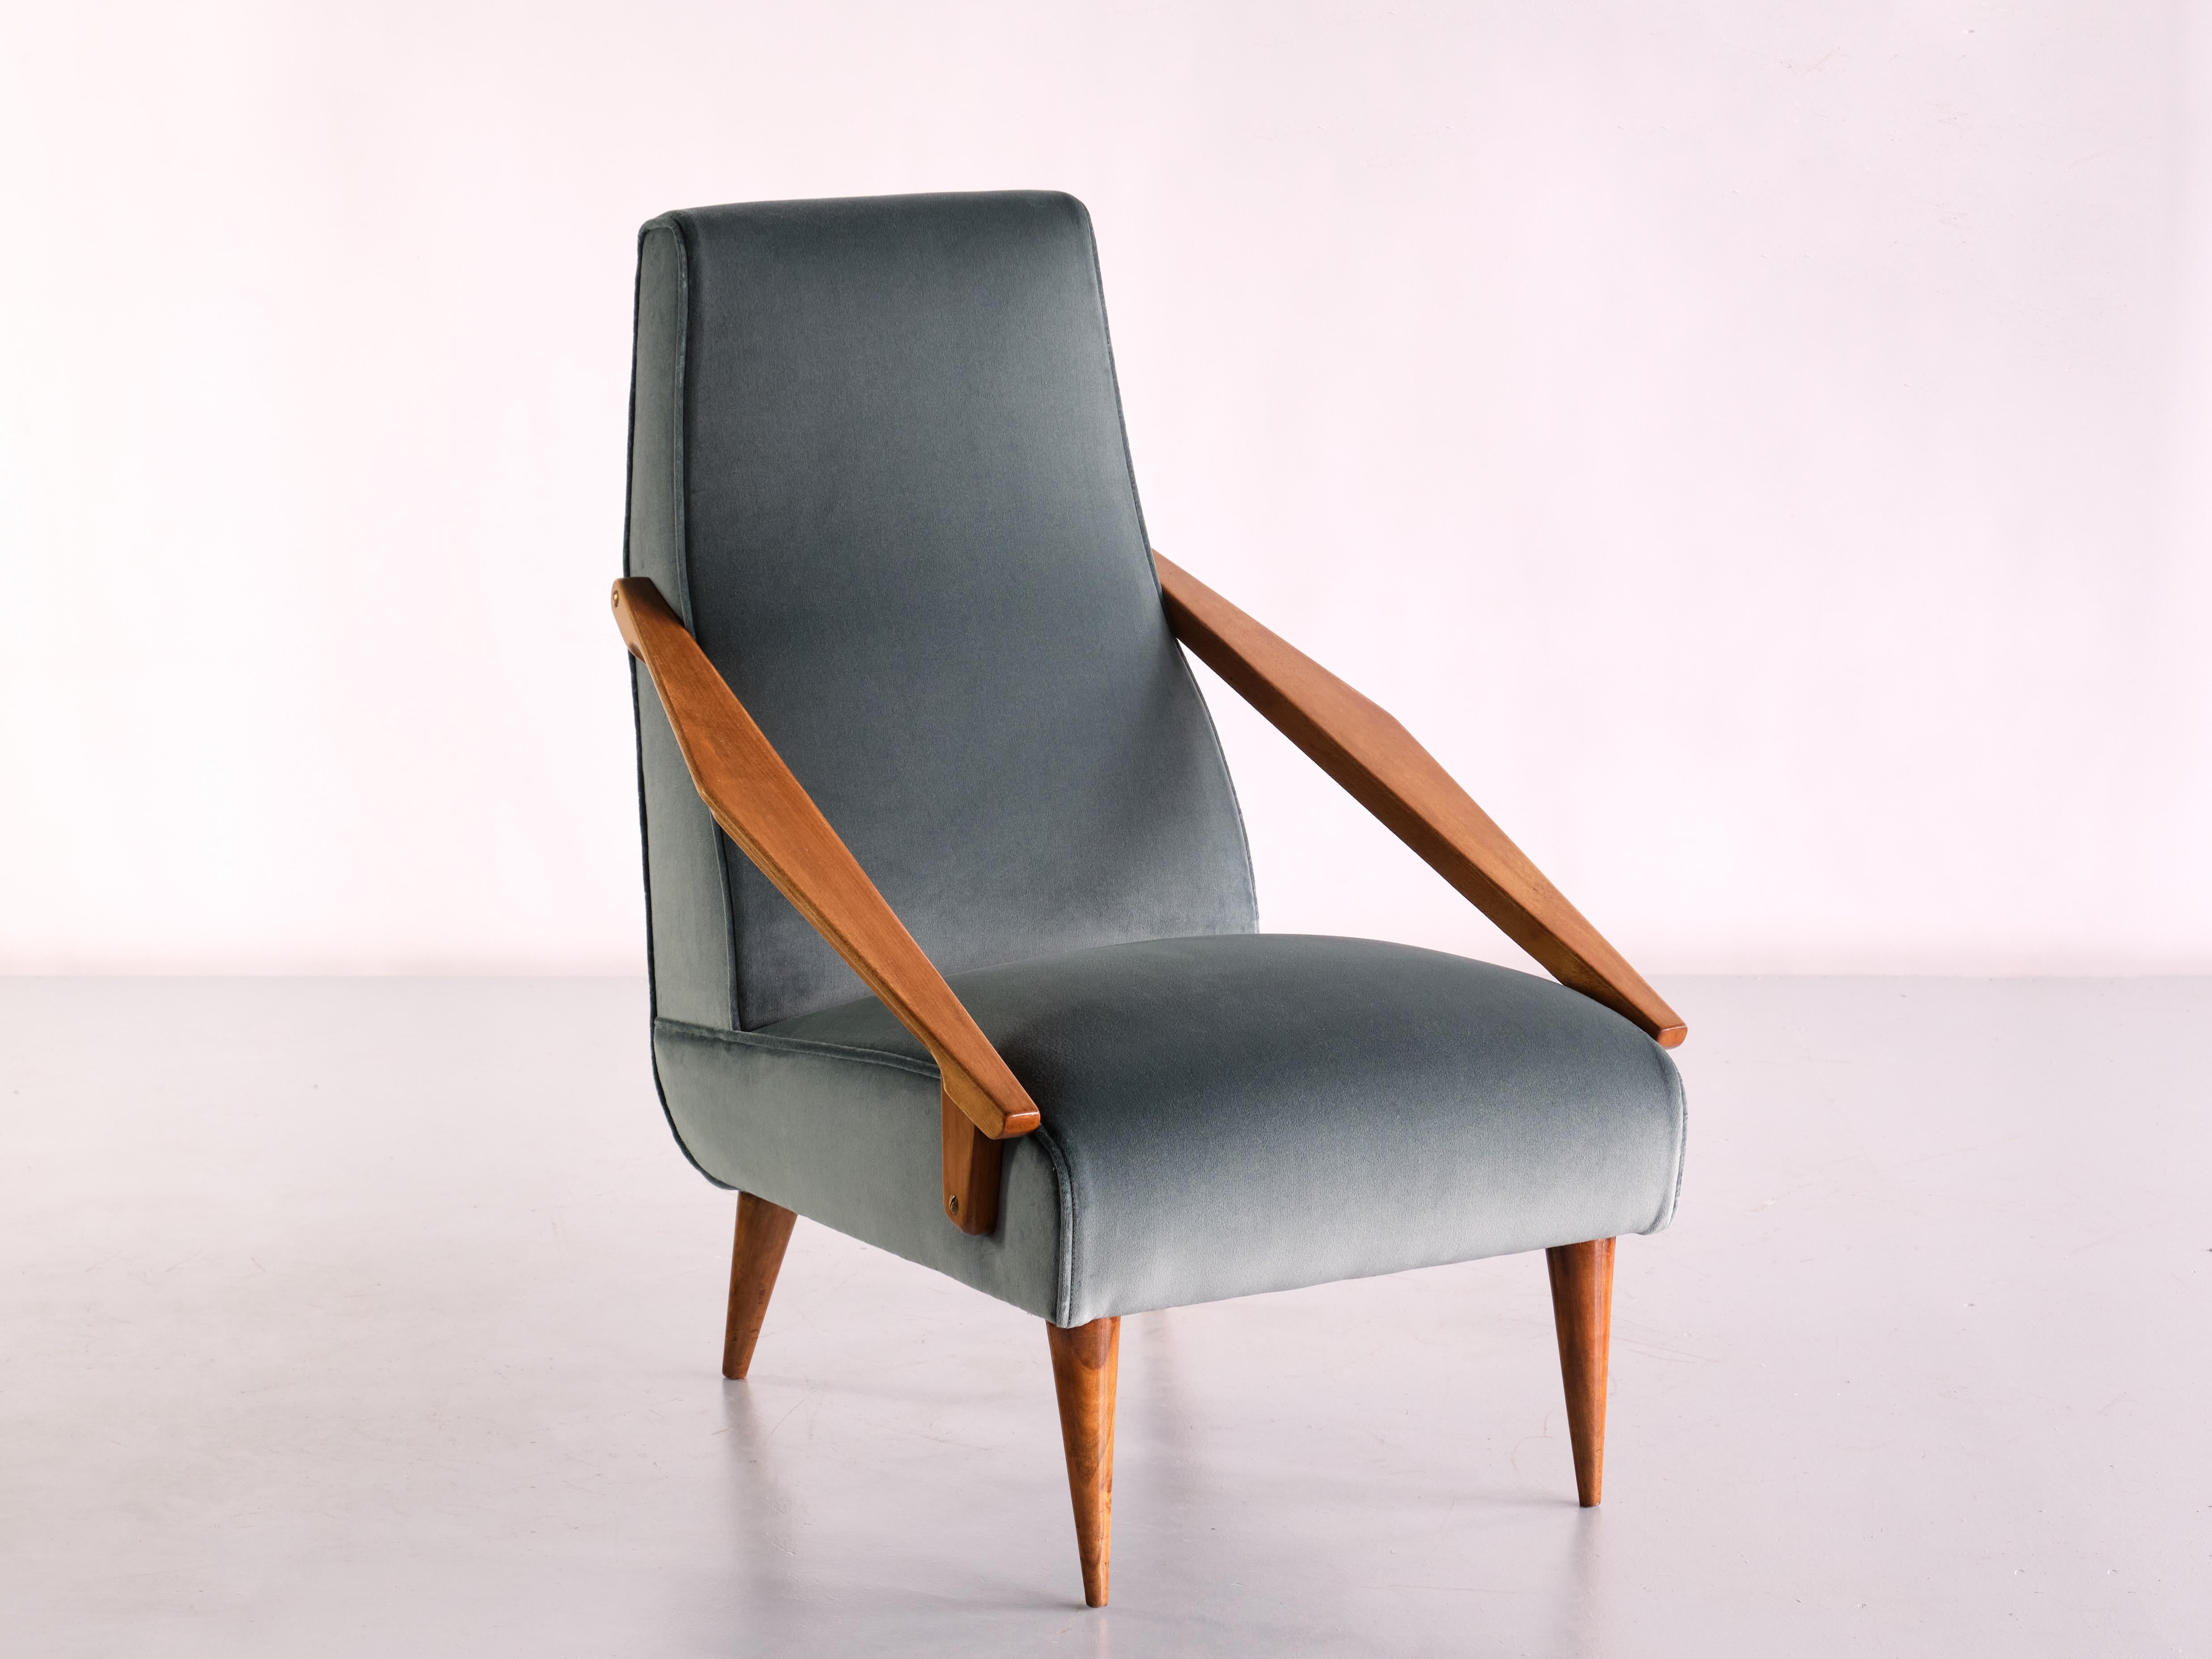 French Gio Ponti Armchair in Green Loro Piana Velvet and Ash Wood, Boucher & Fils, 1955